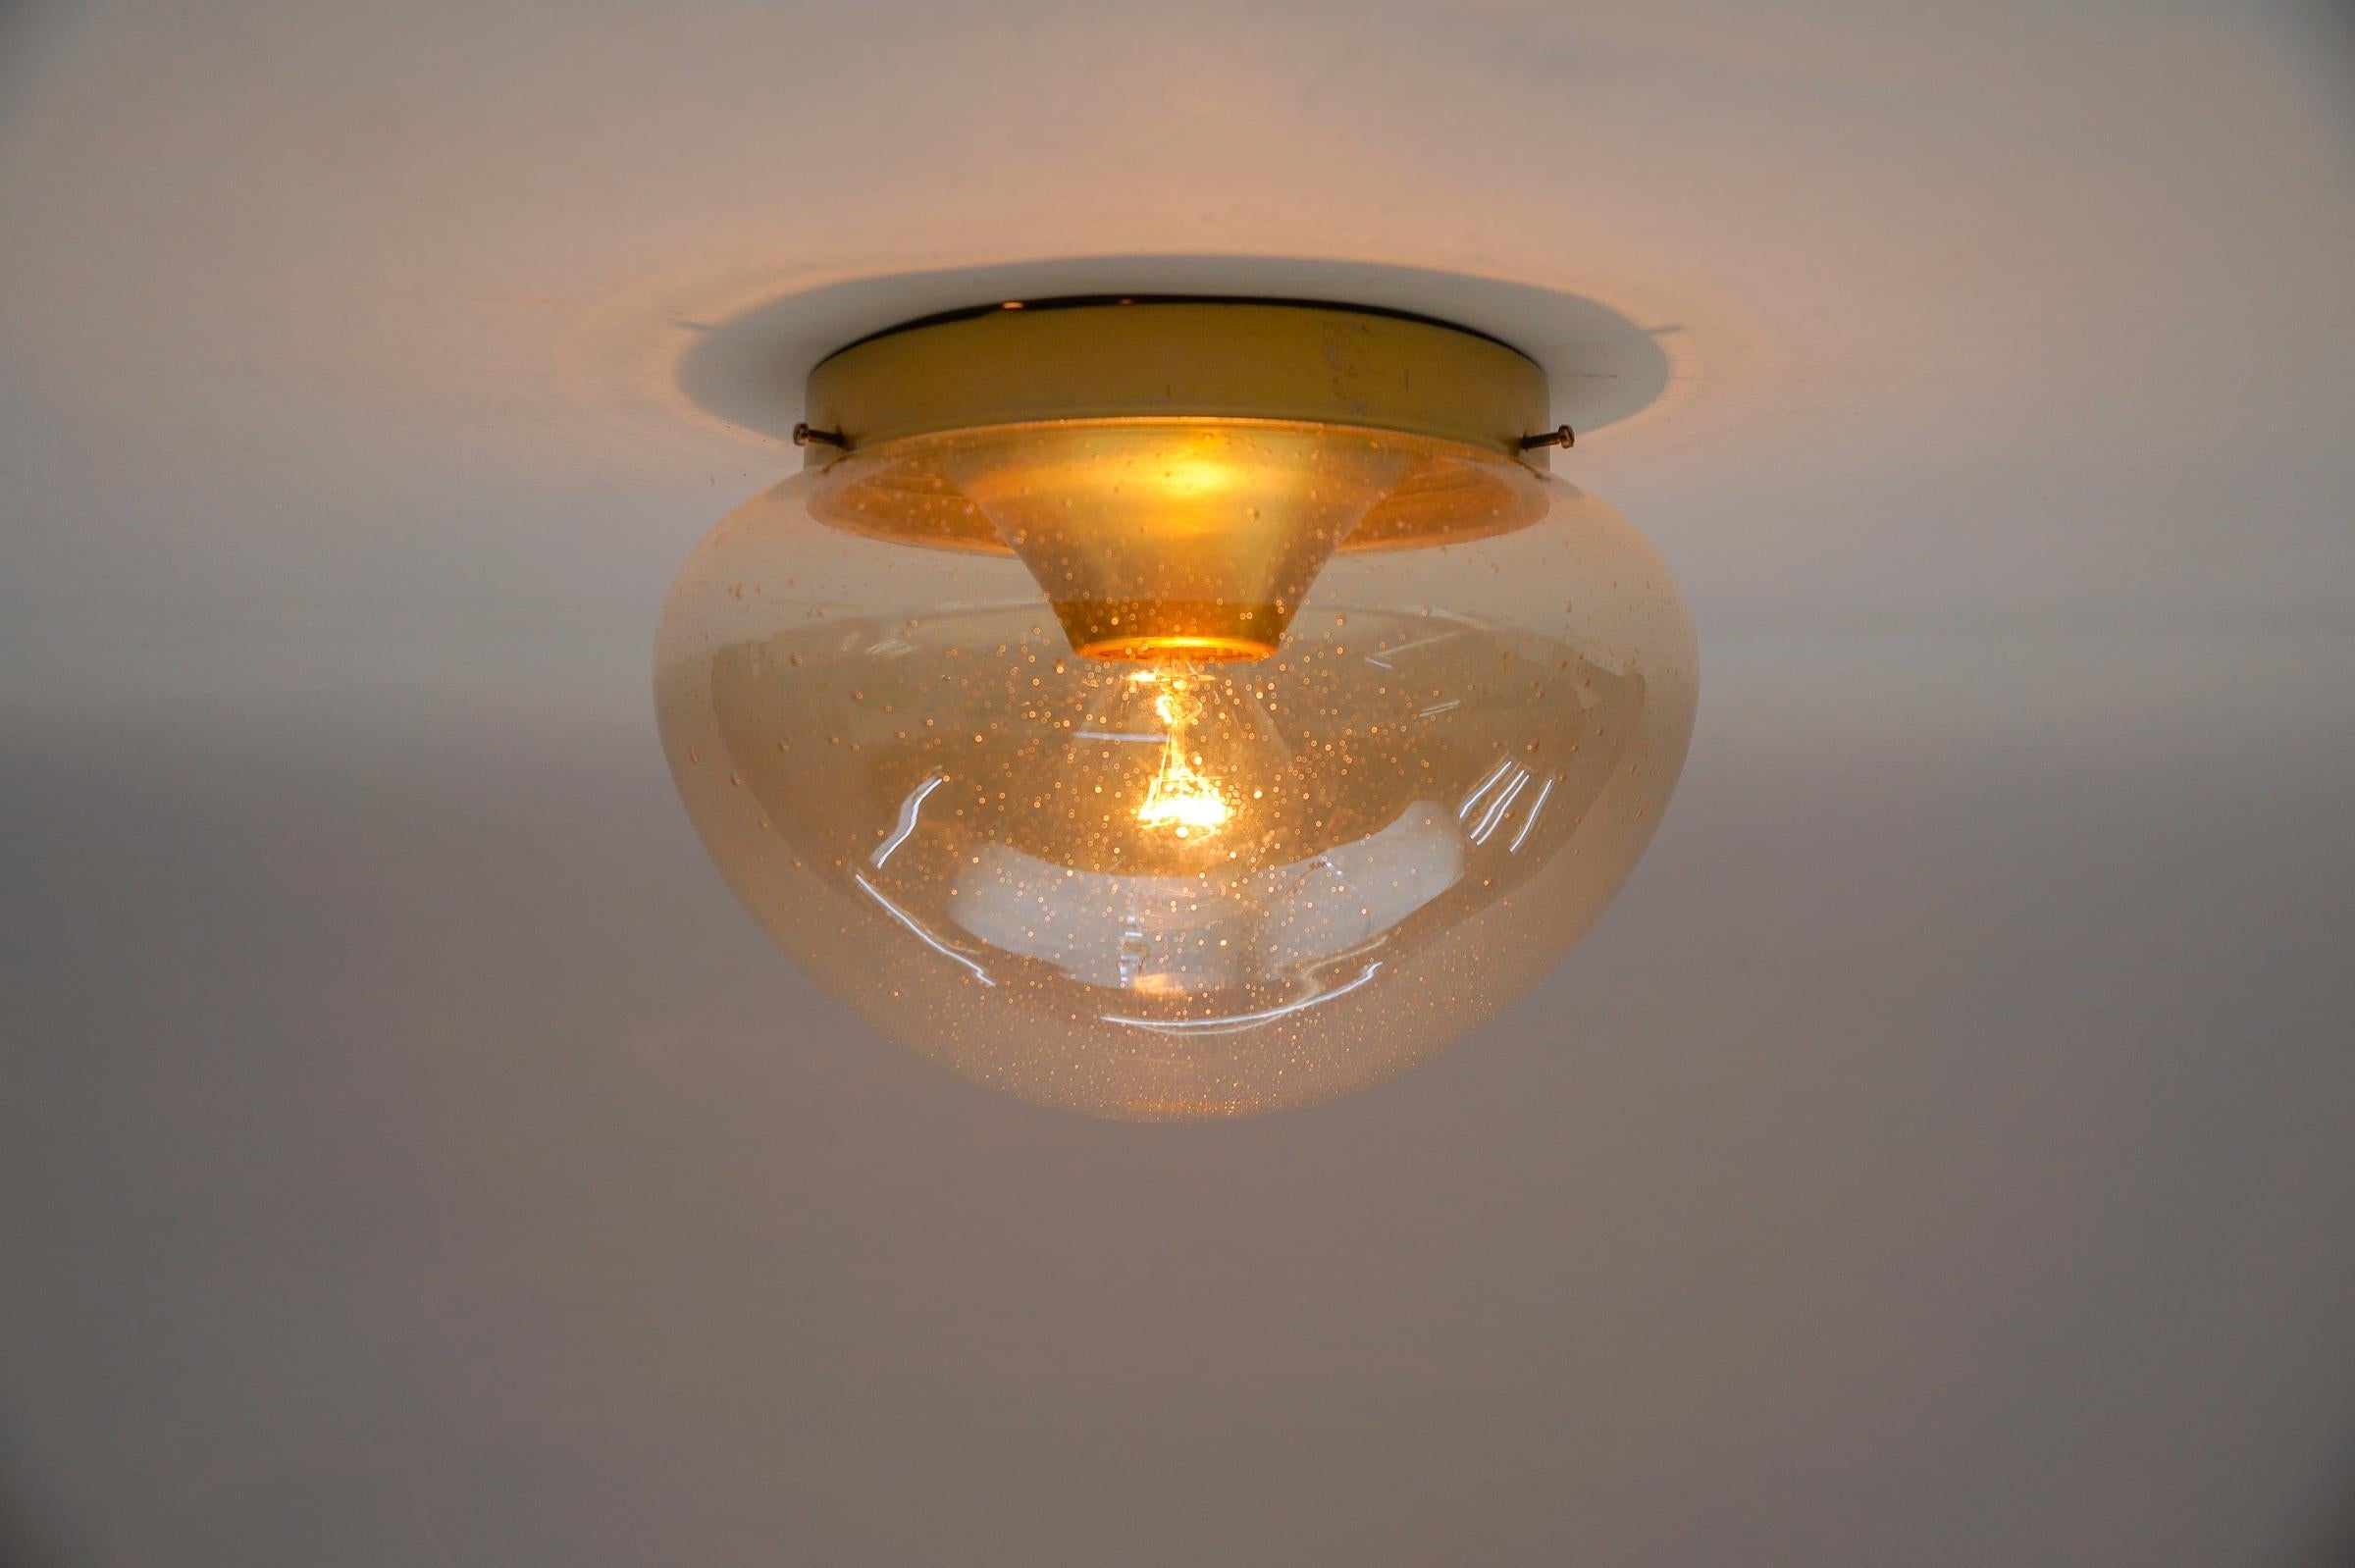 Two Gold Mushroom Shaped Glass Lamp, Germany, 1960s

Dimensions
Height: 7.08 in. (18 cm)
Diameter: 10.23 in. (26 cm)

The fixture need 1 x E27 standard bulb with 60W max.

Light bulbs are not included.
It is possible to install this fixture in all